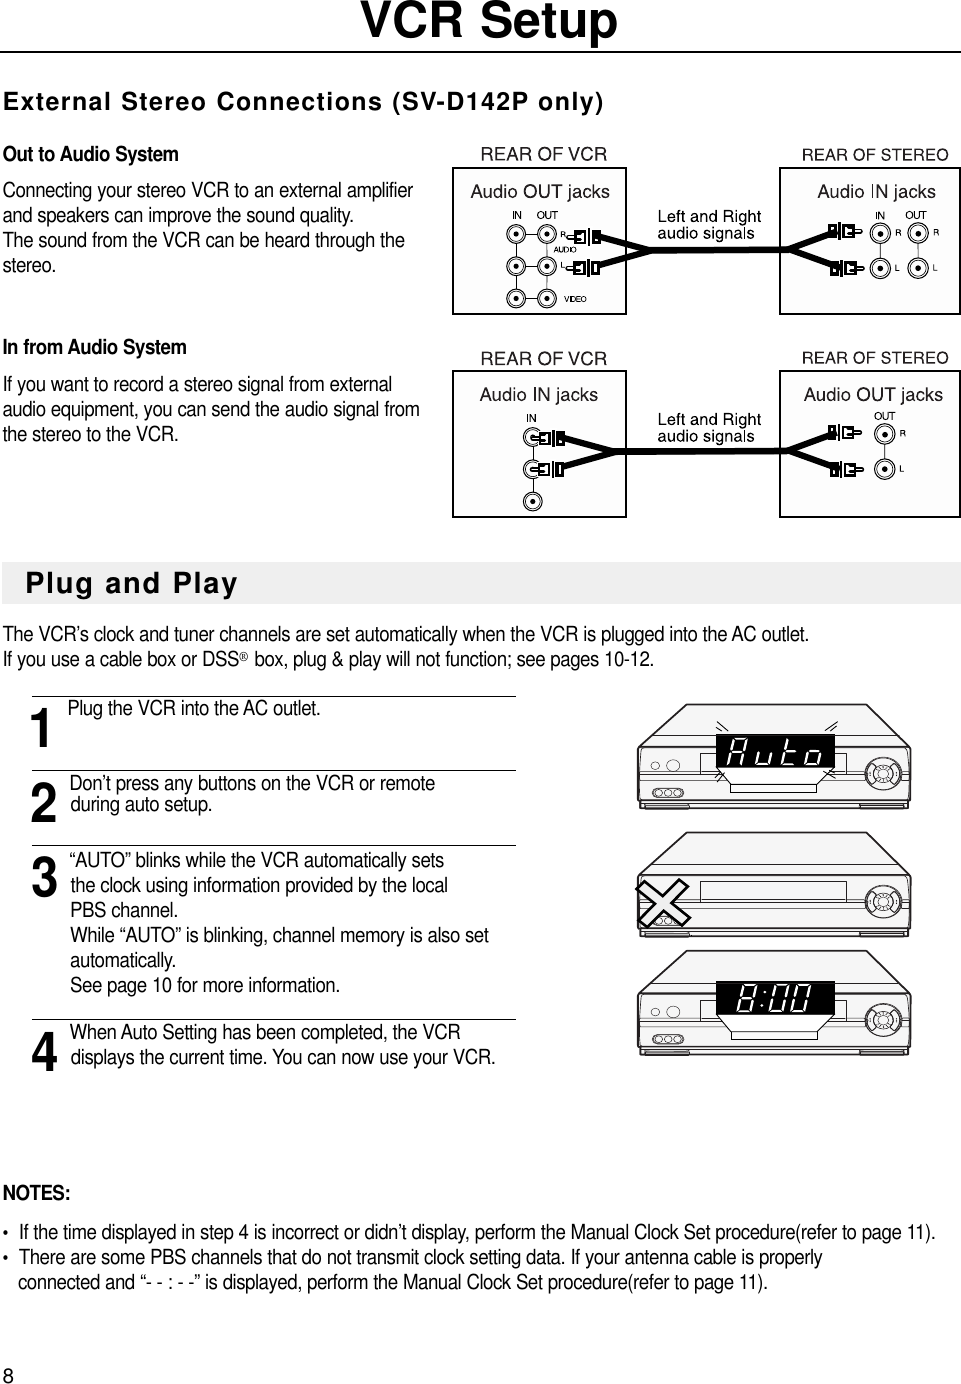 8VCR SetupExternal Stereo Connections (SV-D142P only)Out to Audio System Connecting your stereo VCR to an external amplifierand speakers can improve the sound quality.  The sound from the VCR can be heard through thestereo.In from Audio SystemIf you want to record a stereo signal from externalaudio equipment, you can send the audio signal fromthe stereo to the VCR. The VCR’s clock and tuner channels are set automatically when the VCR is plugged into the AC outlet.If you use a cable box or DSS®box, plug &amp; play will not function; see pages 10-12.1Plug the VCR into the AC outlet.2Don’t press any buttons on the VCR or remoteduring auto setup.3“AUTO” blinks while the VCR automatically setsthe clock using information provided by the localPBS channel. While “AUTO” is blinking, channel memory is also set automatically. See page 10 for more information.4When Auto Setting has been completed, the VCR displays the current time. You can now use your VCR.NOTES:•  If the time displayed in step 4 is incorrect or didn’t display, perform the Manual Clock Set procedure(refer to page 11).•  There are some PBS channels that do not transmit clock setting data. If your antenna cable is properlyconnected and “- - : - -” is displayed, perform the Manual Clock Set procedure(refer to page 11).Plug and Play